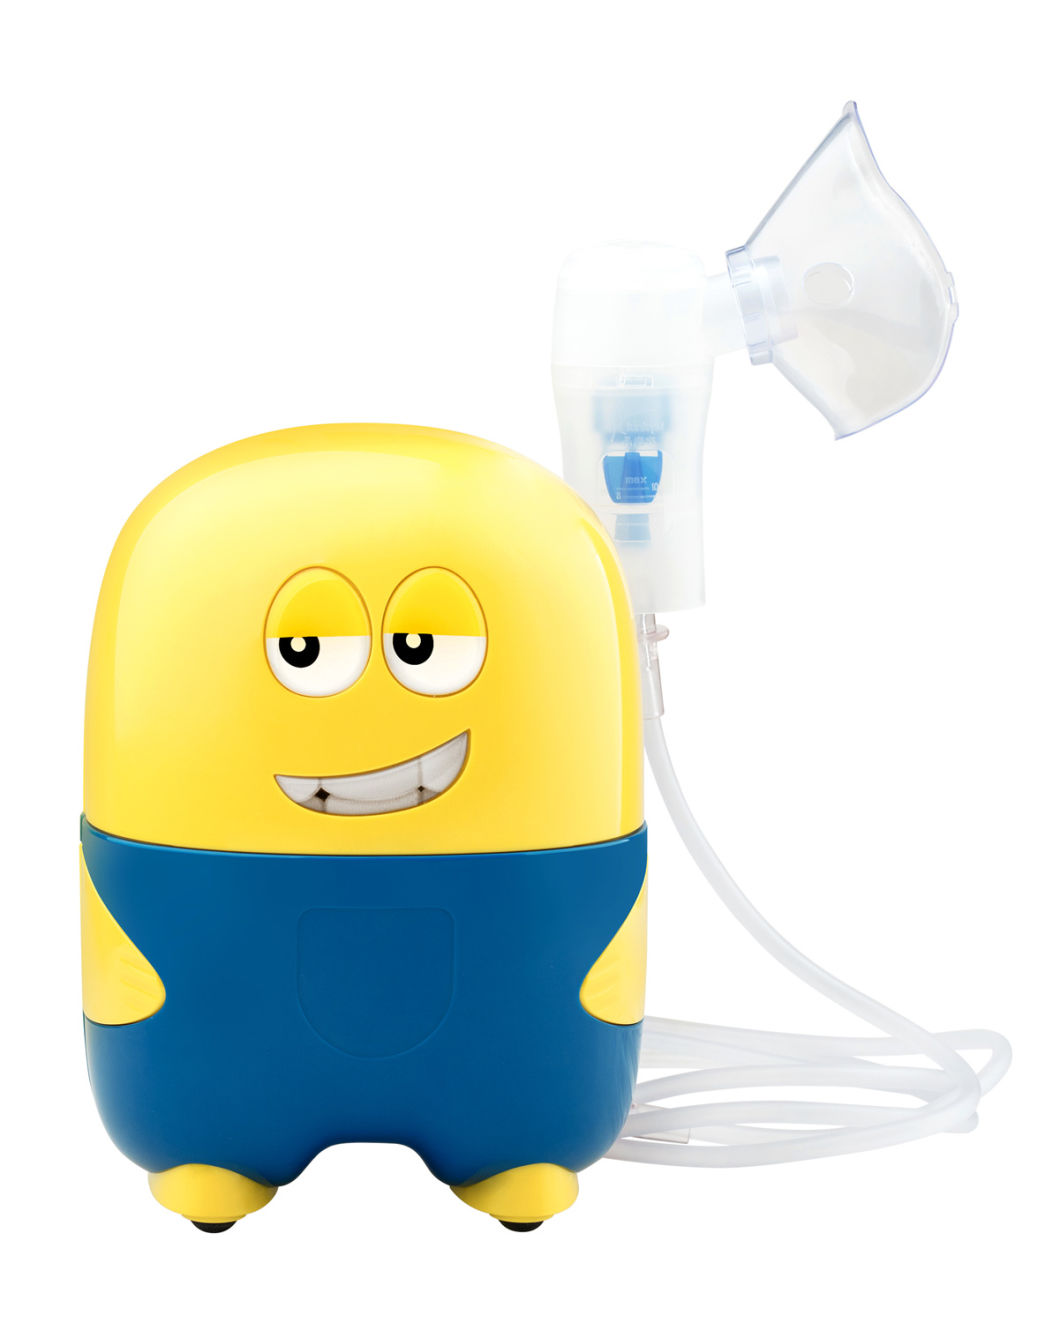 Mslwhb02-Cute appearance Medical Air-Compressing Nebulizer